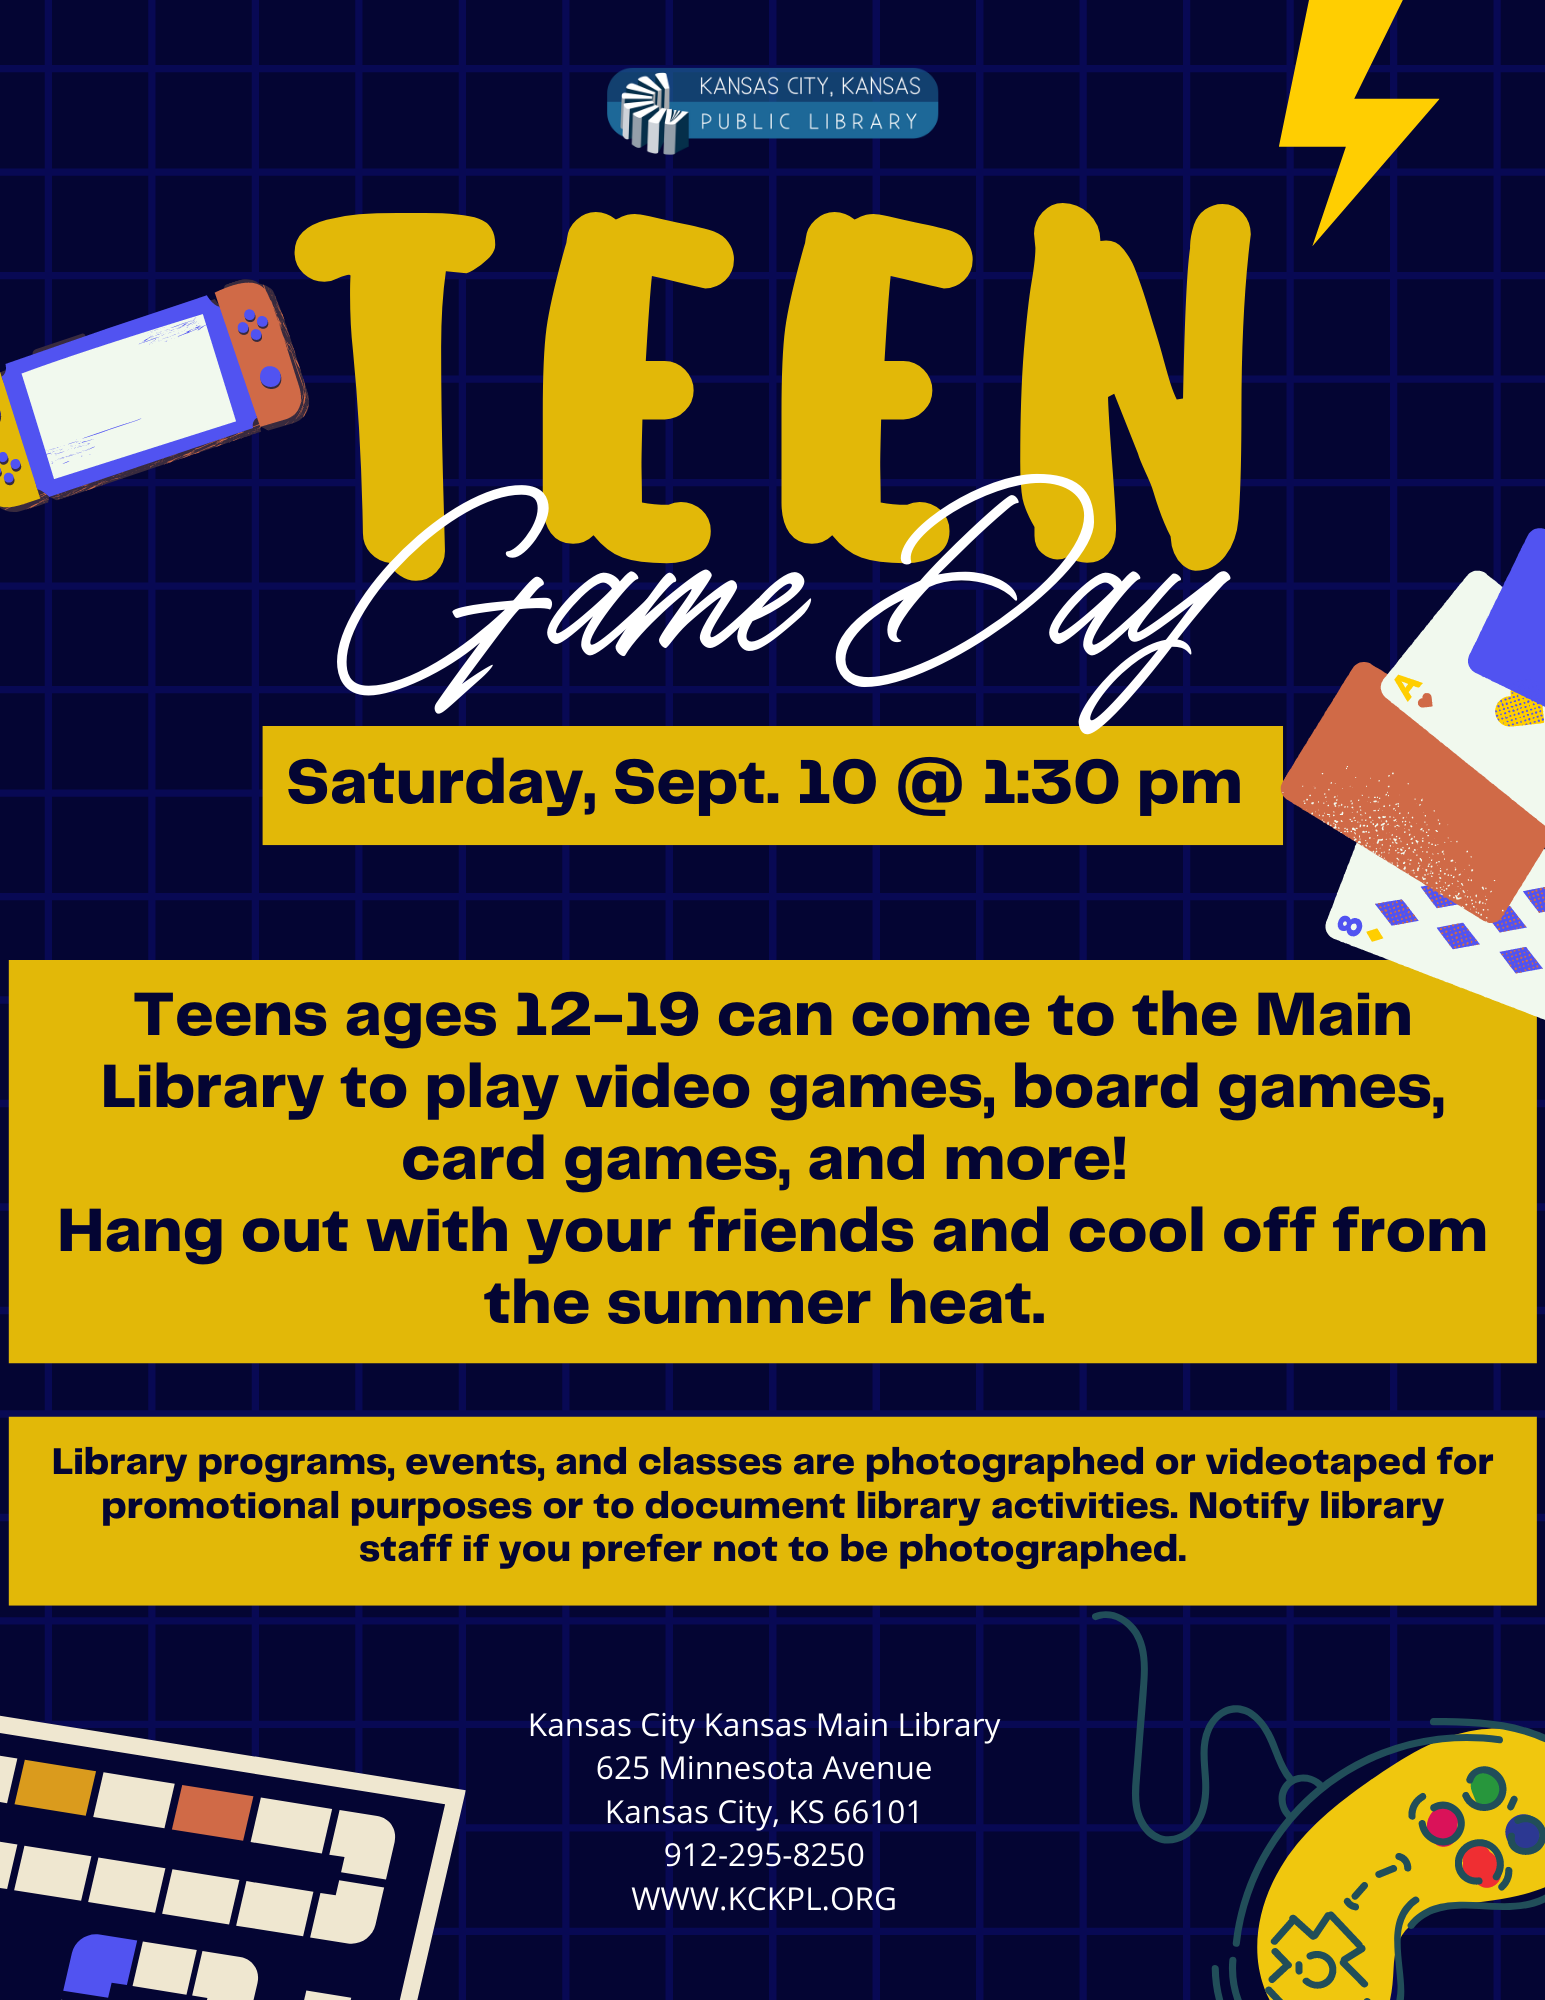 Teens ages 12-19 can come to the Main Library to play video games, board games, card games, and more!